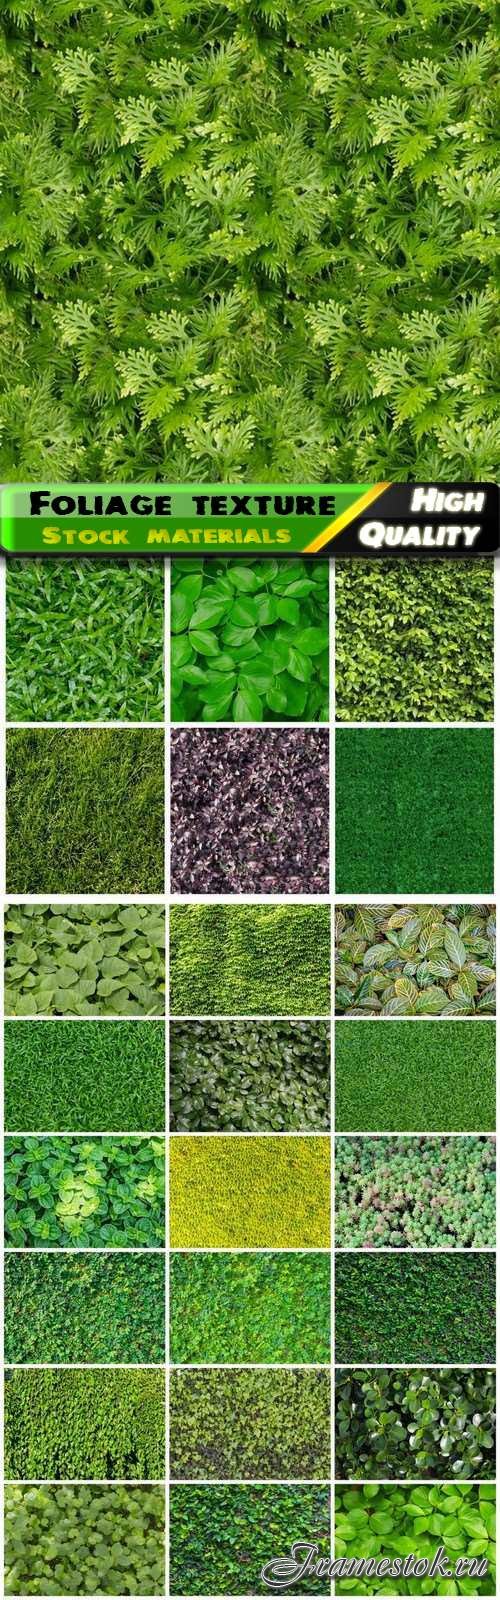 Green seamless foliage and grass eco nature texture - 25 HQ Jpg